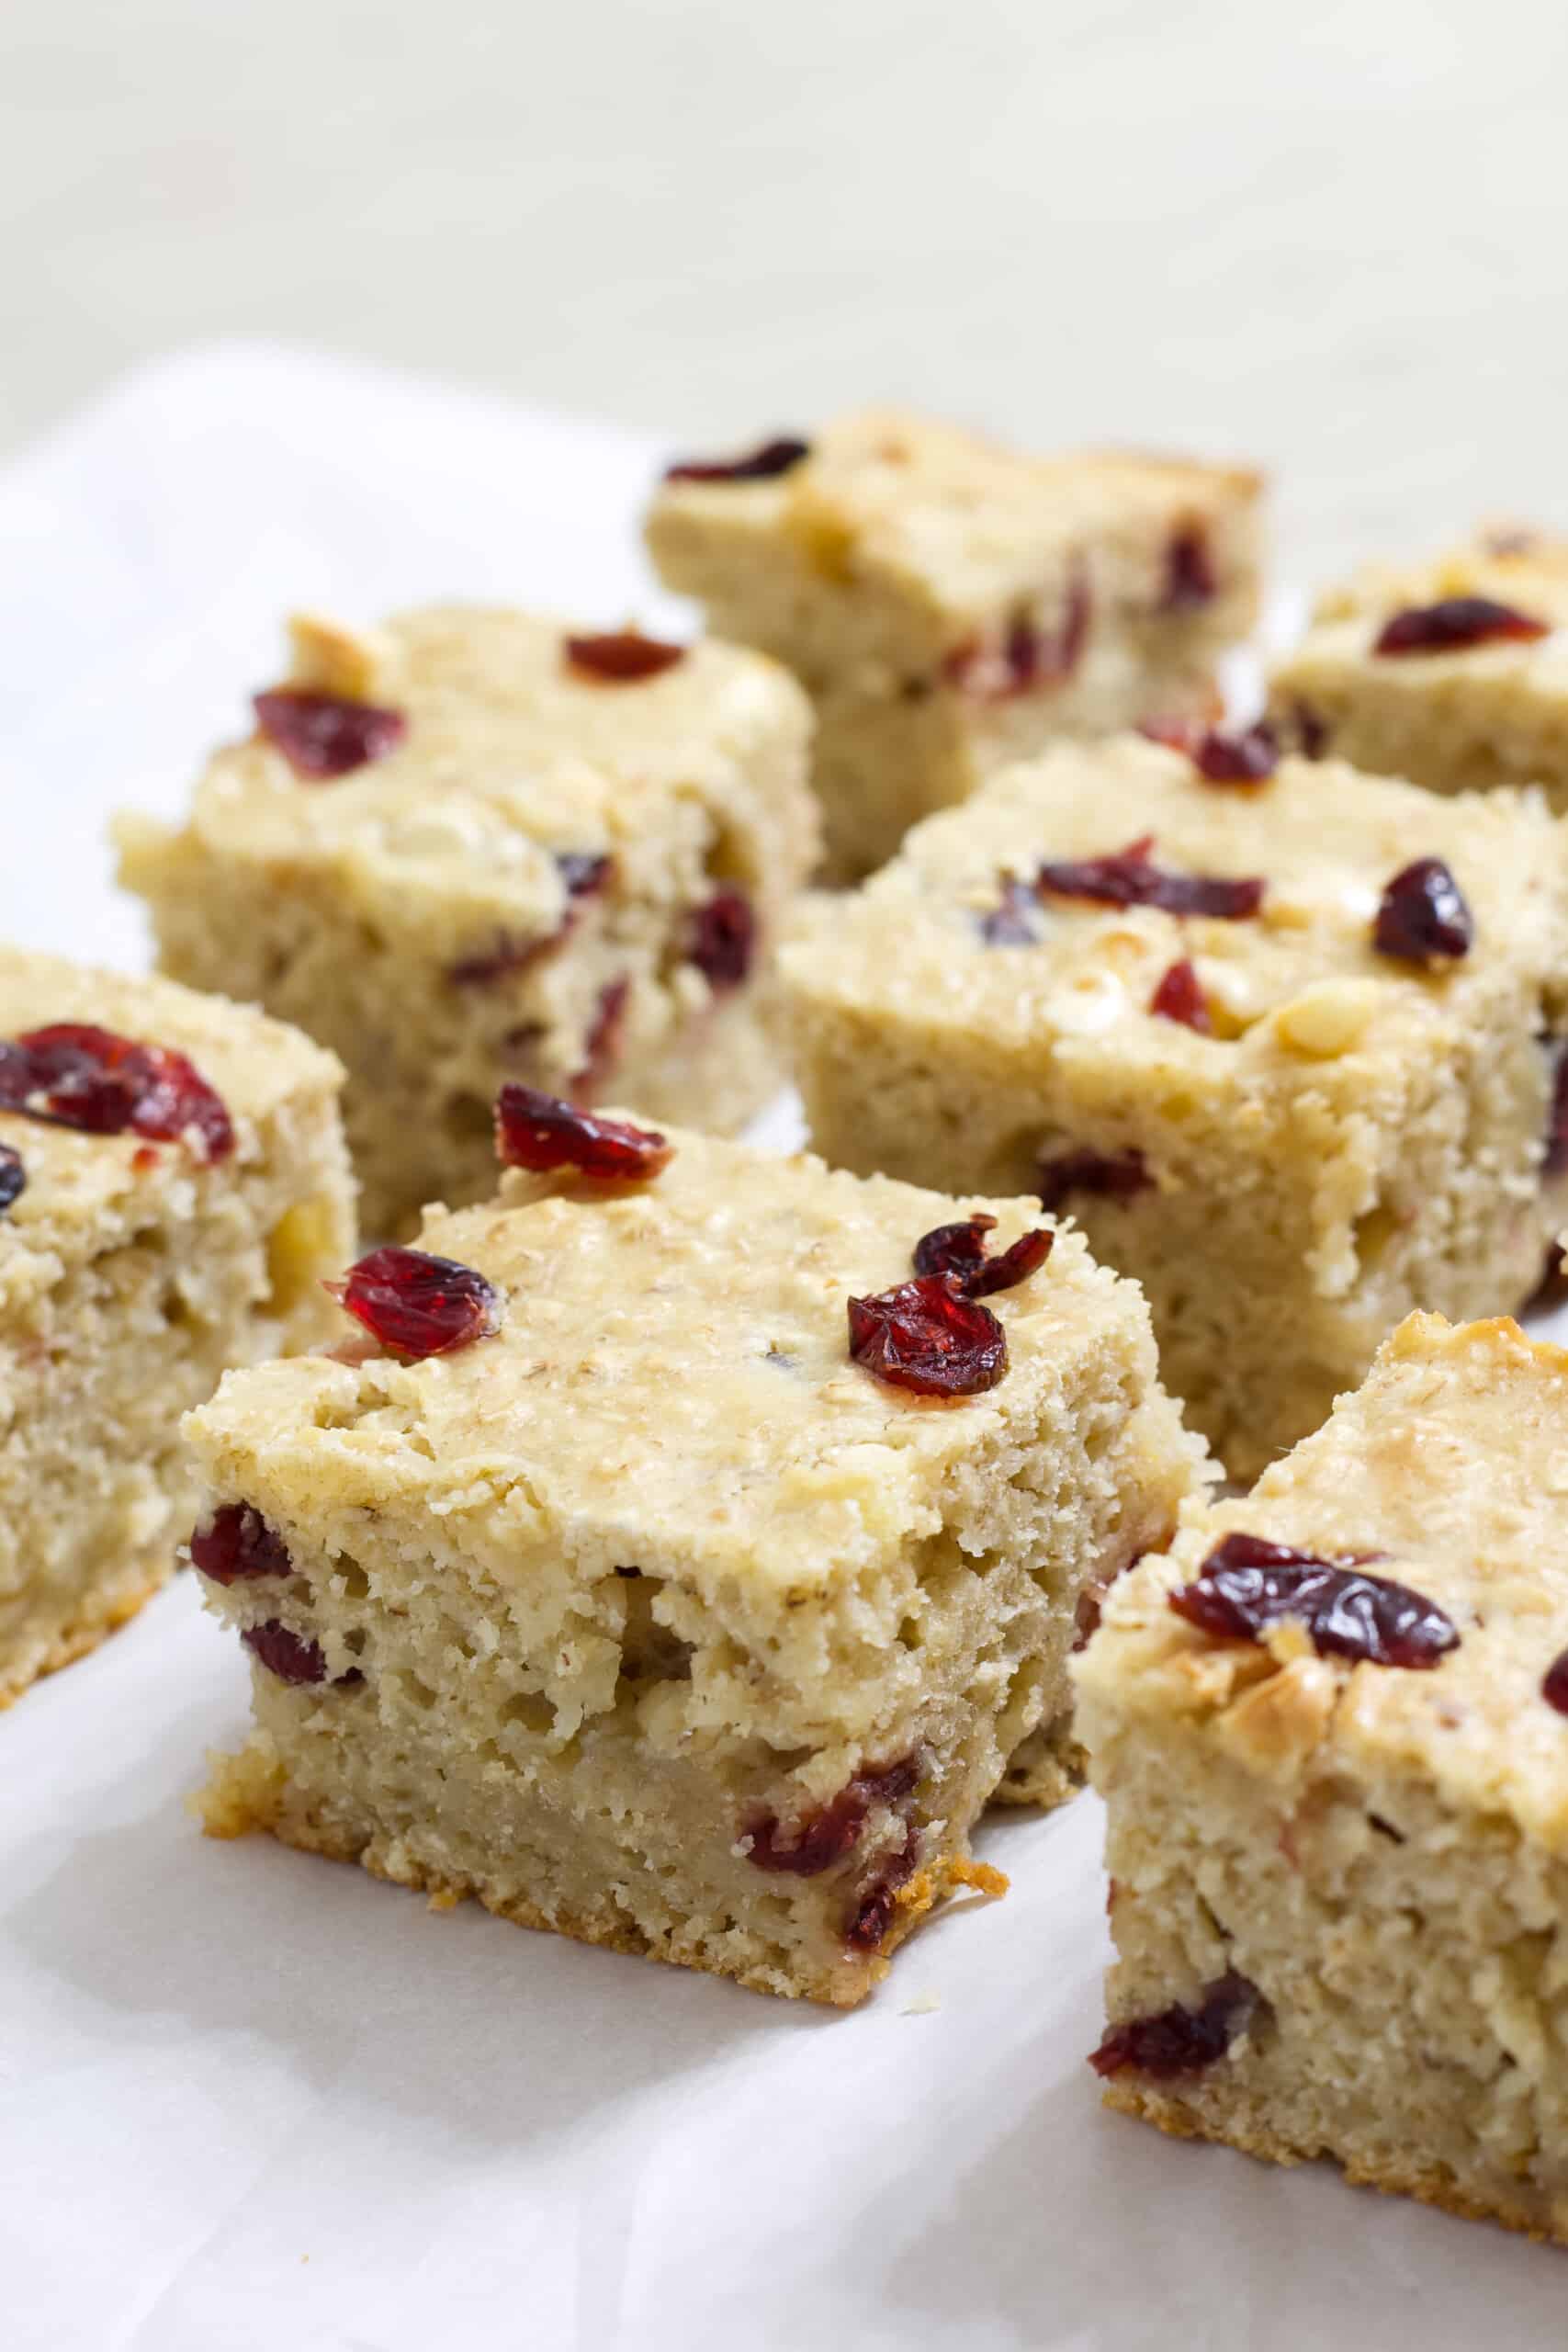 Side view of several oatmeal bars with white chocolate chips and dried cranberries.